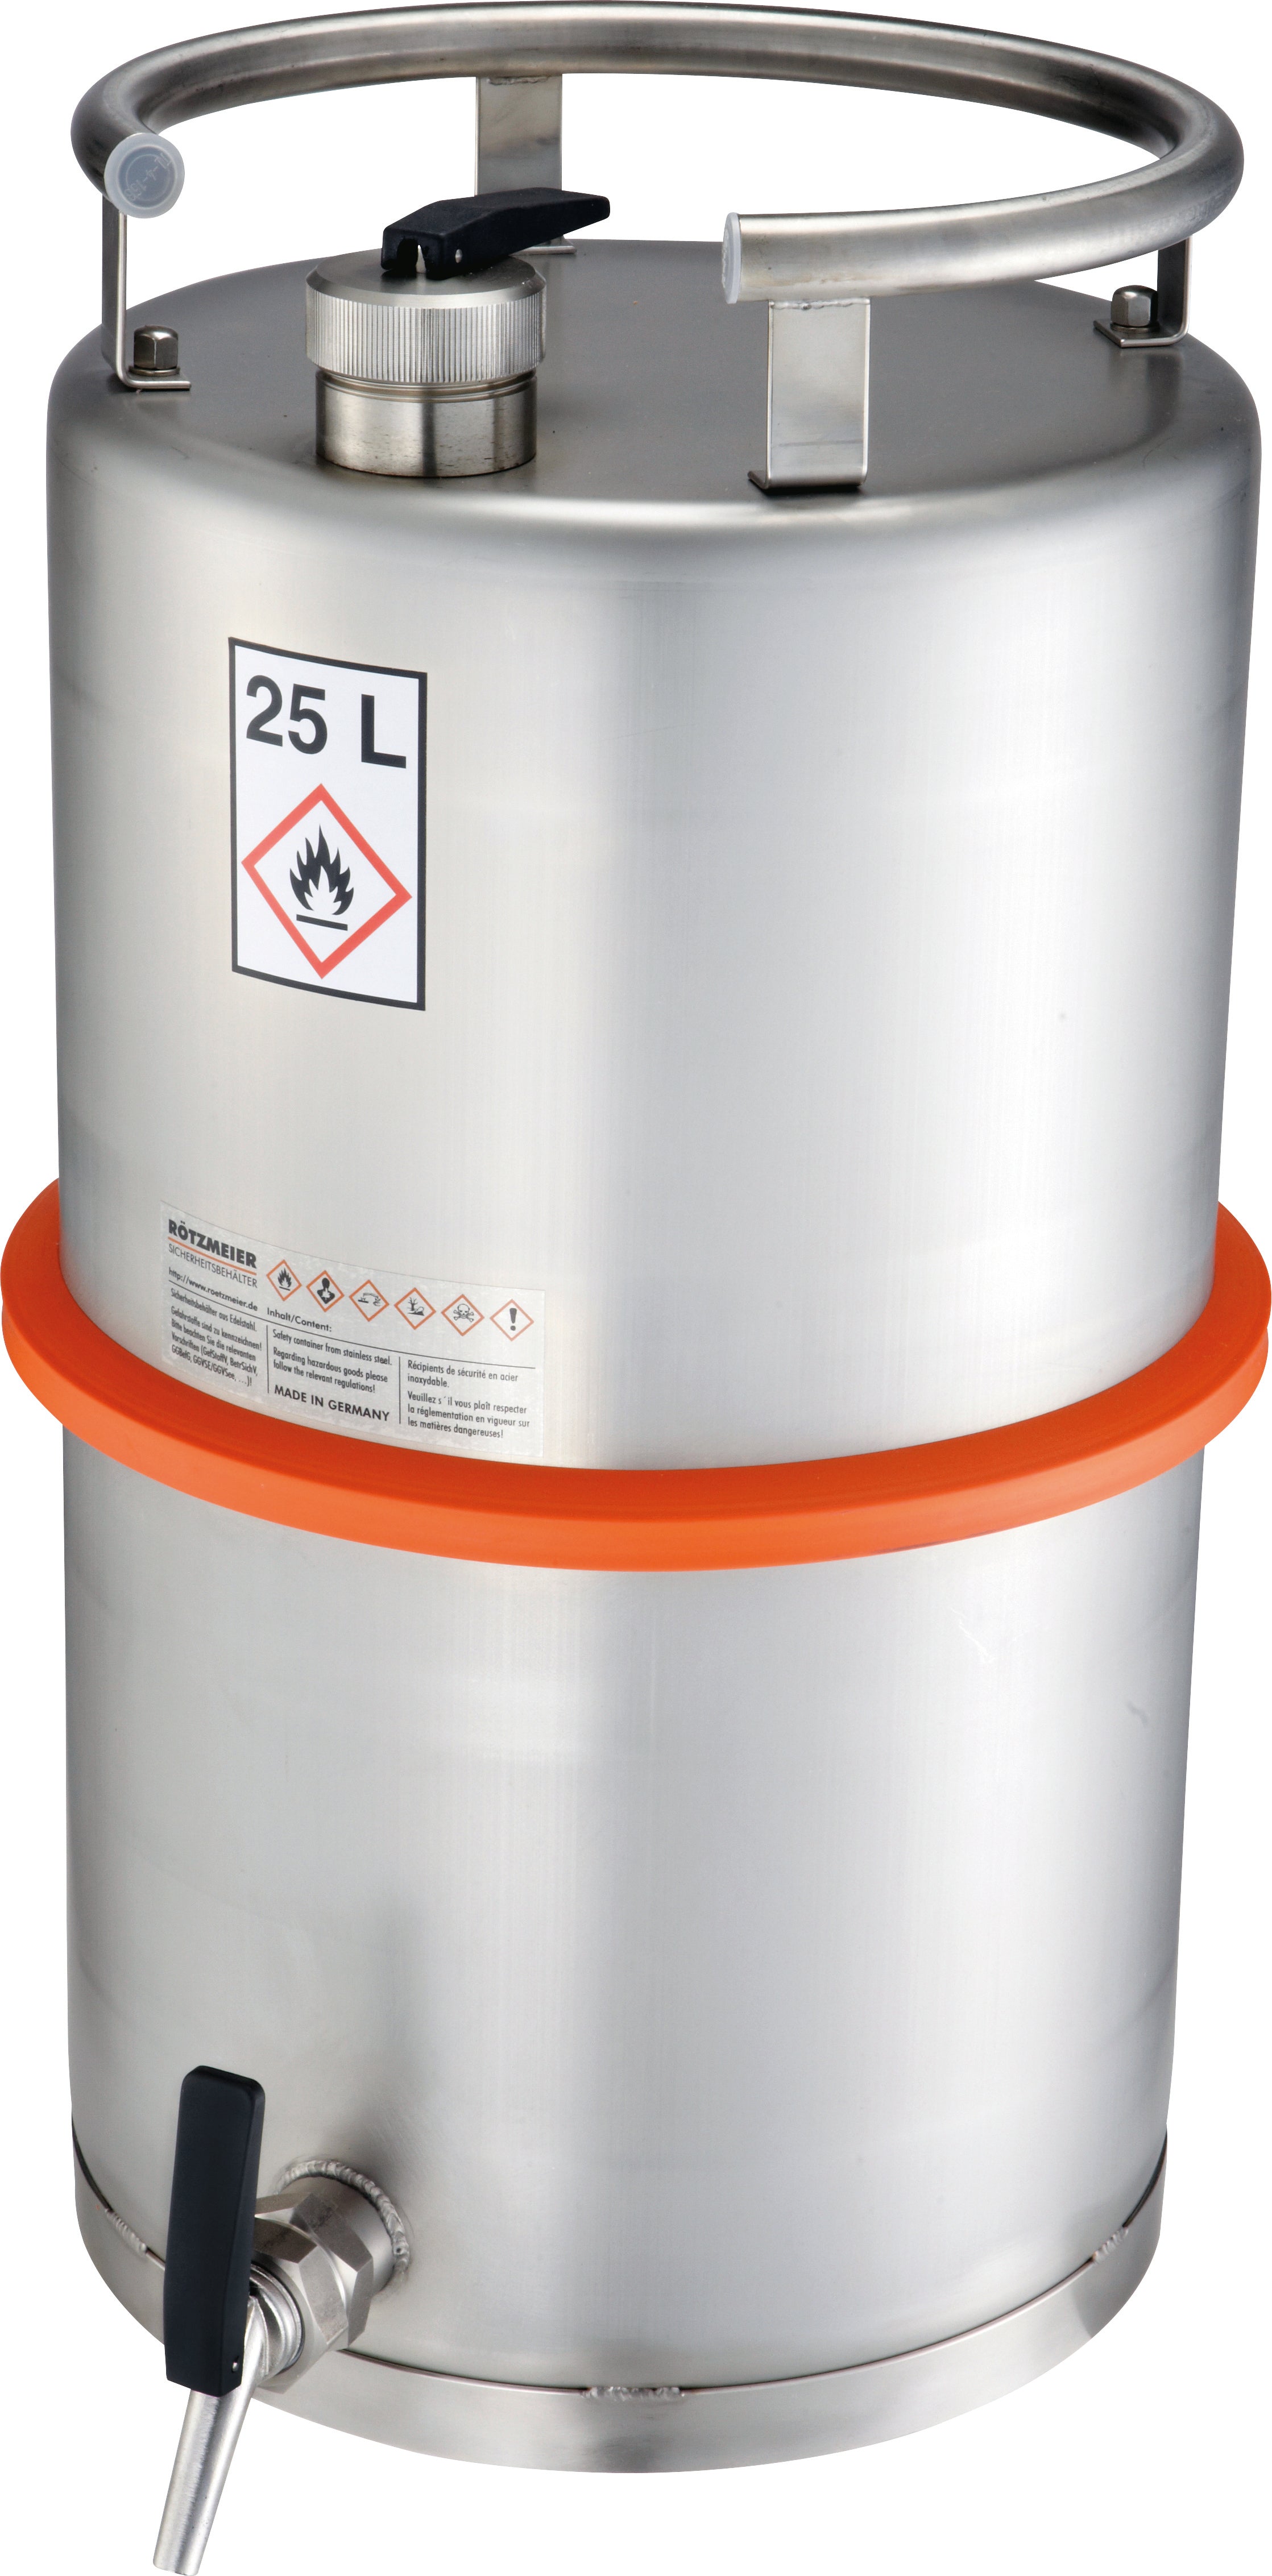 Safety container st.steel 1.4571, 25 L, stainless steel 1.4571 mat